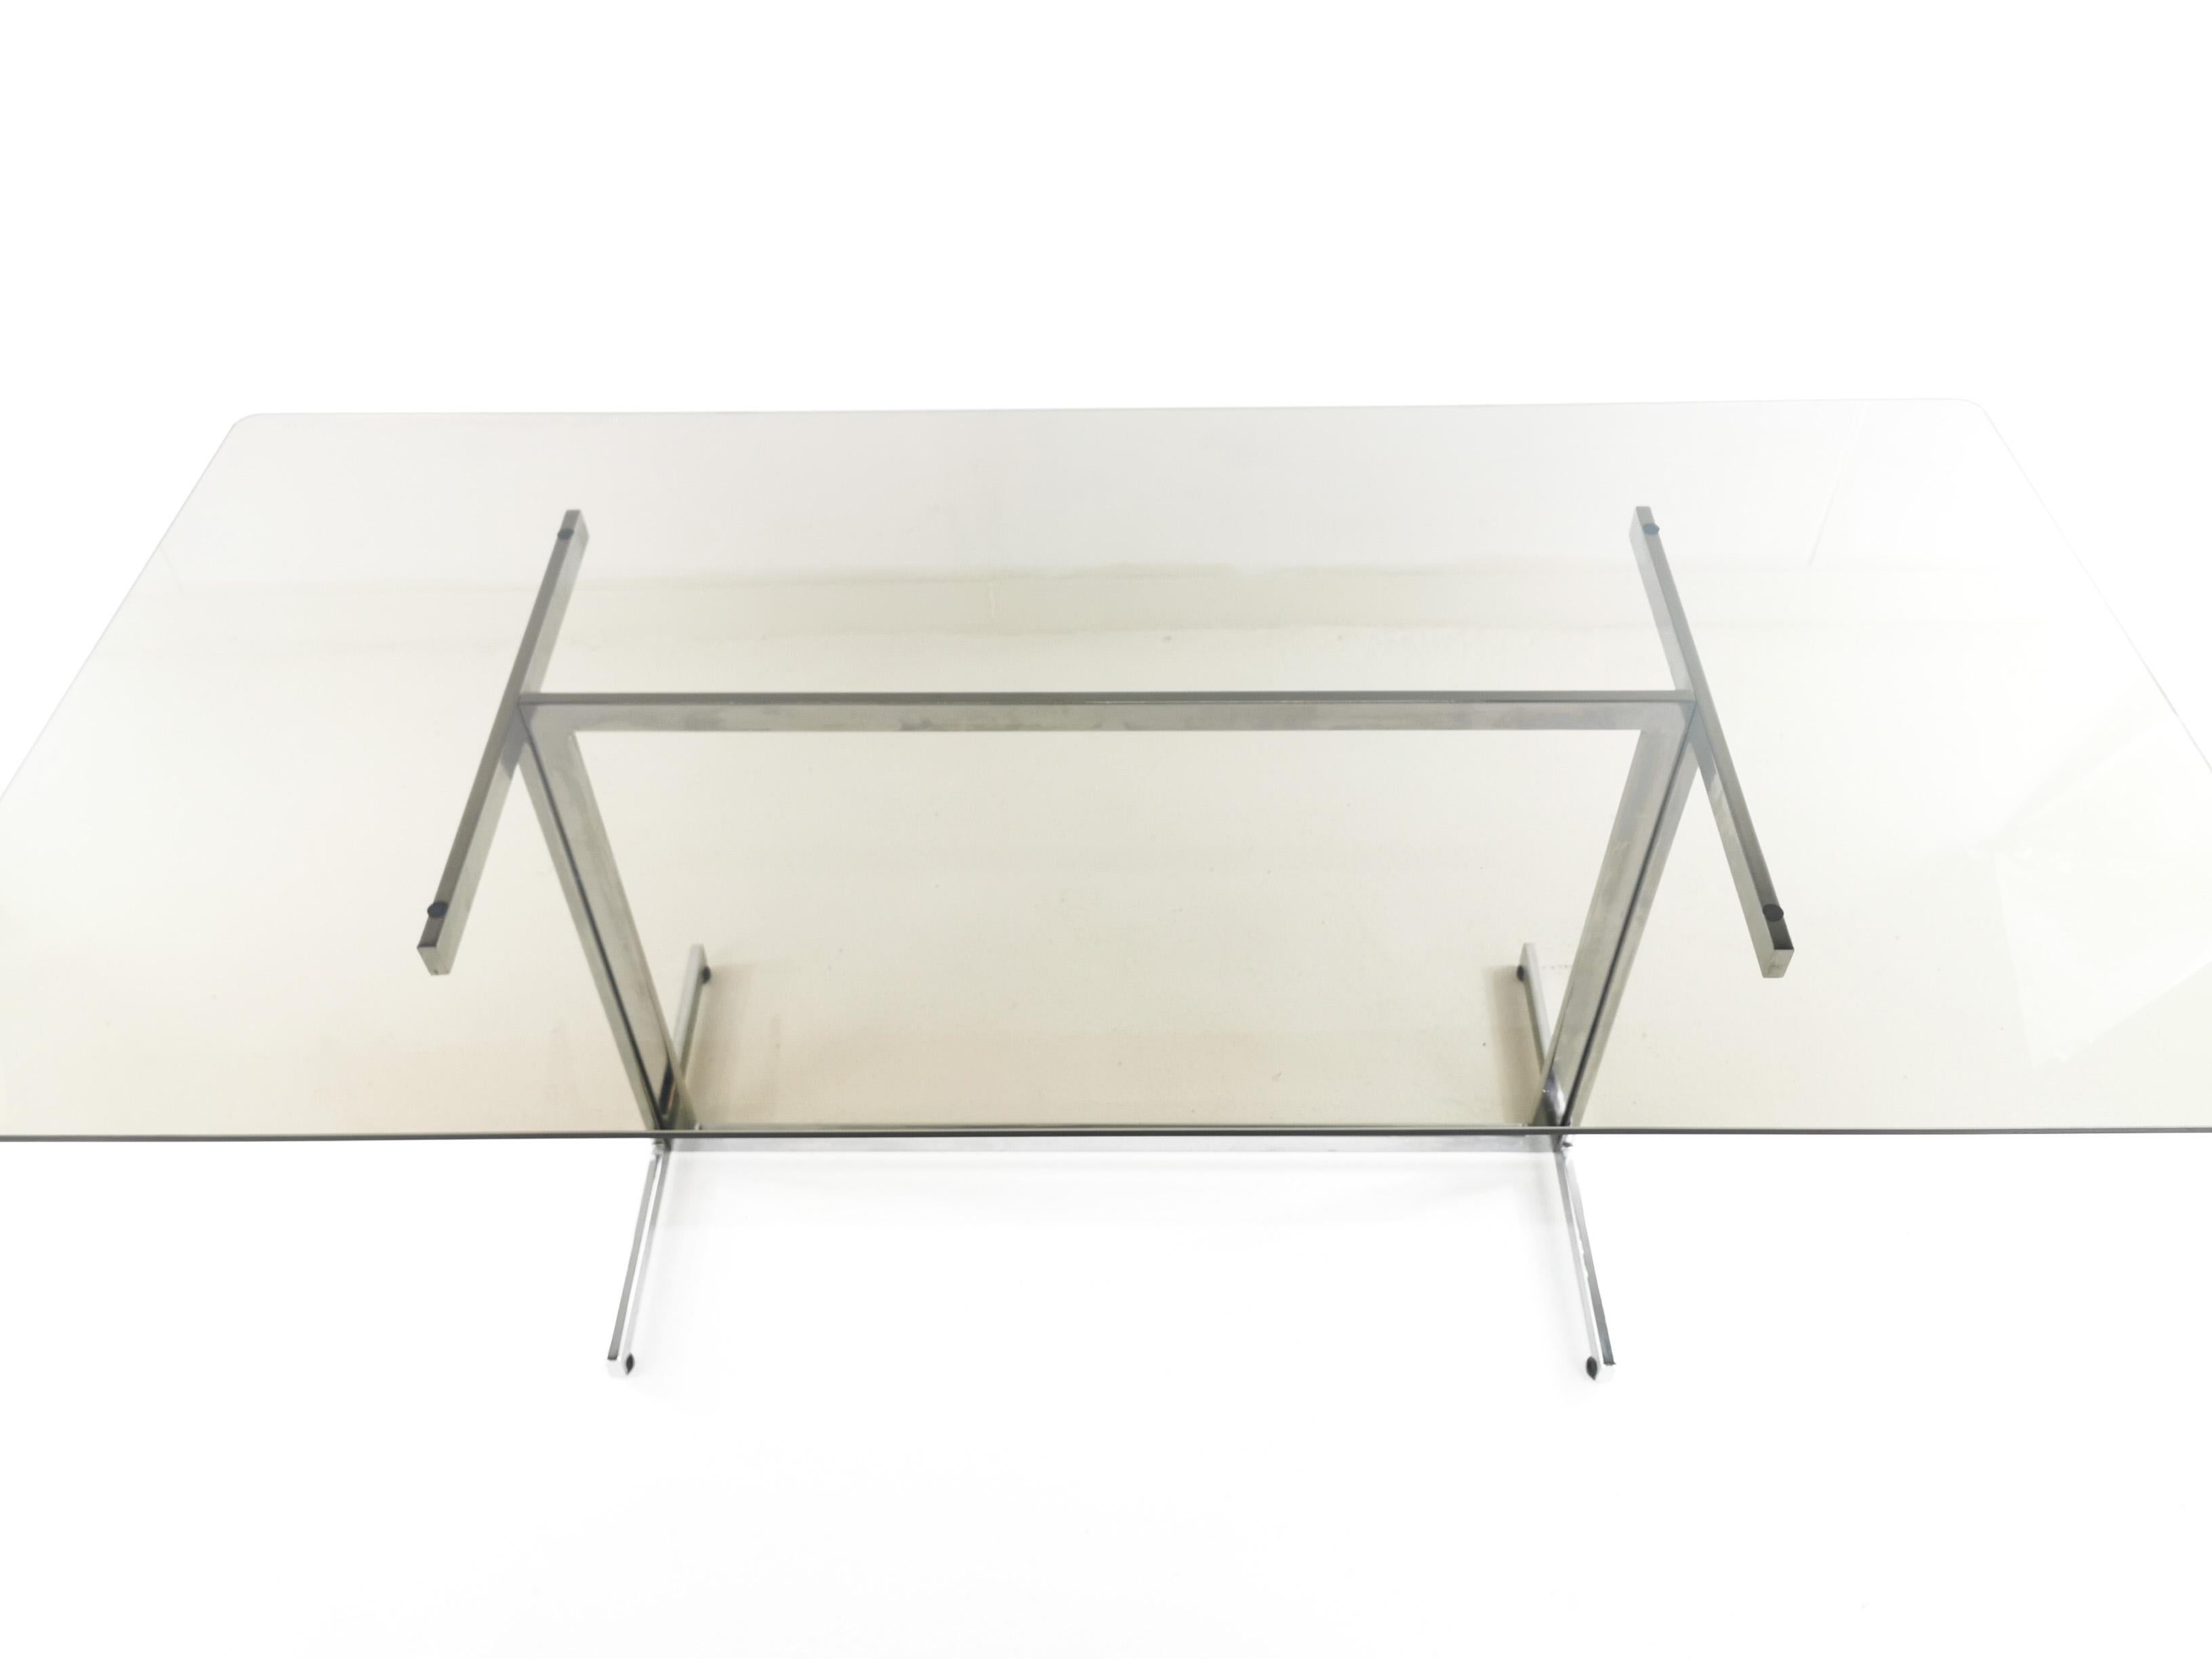 Pieff dining table

A 1970s Tim Bates for Pieff smoked glass and chrome dining table and or desk. A typical 1970s sleek design from the midcentury was considered a luxury furniture item and offered in excellent condition with light usage